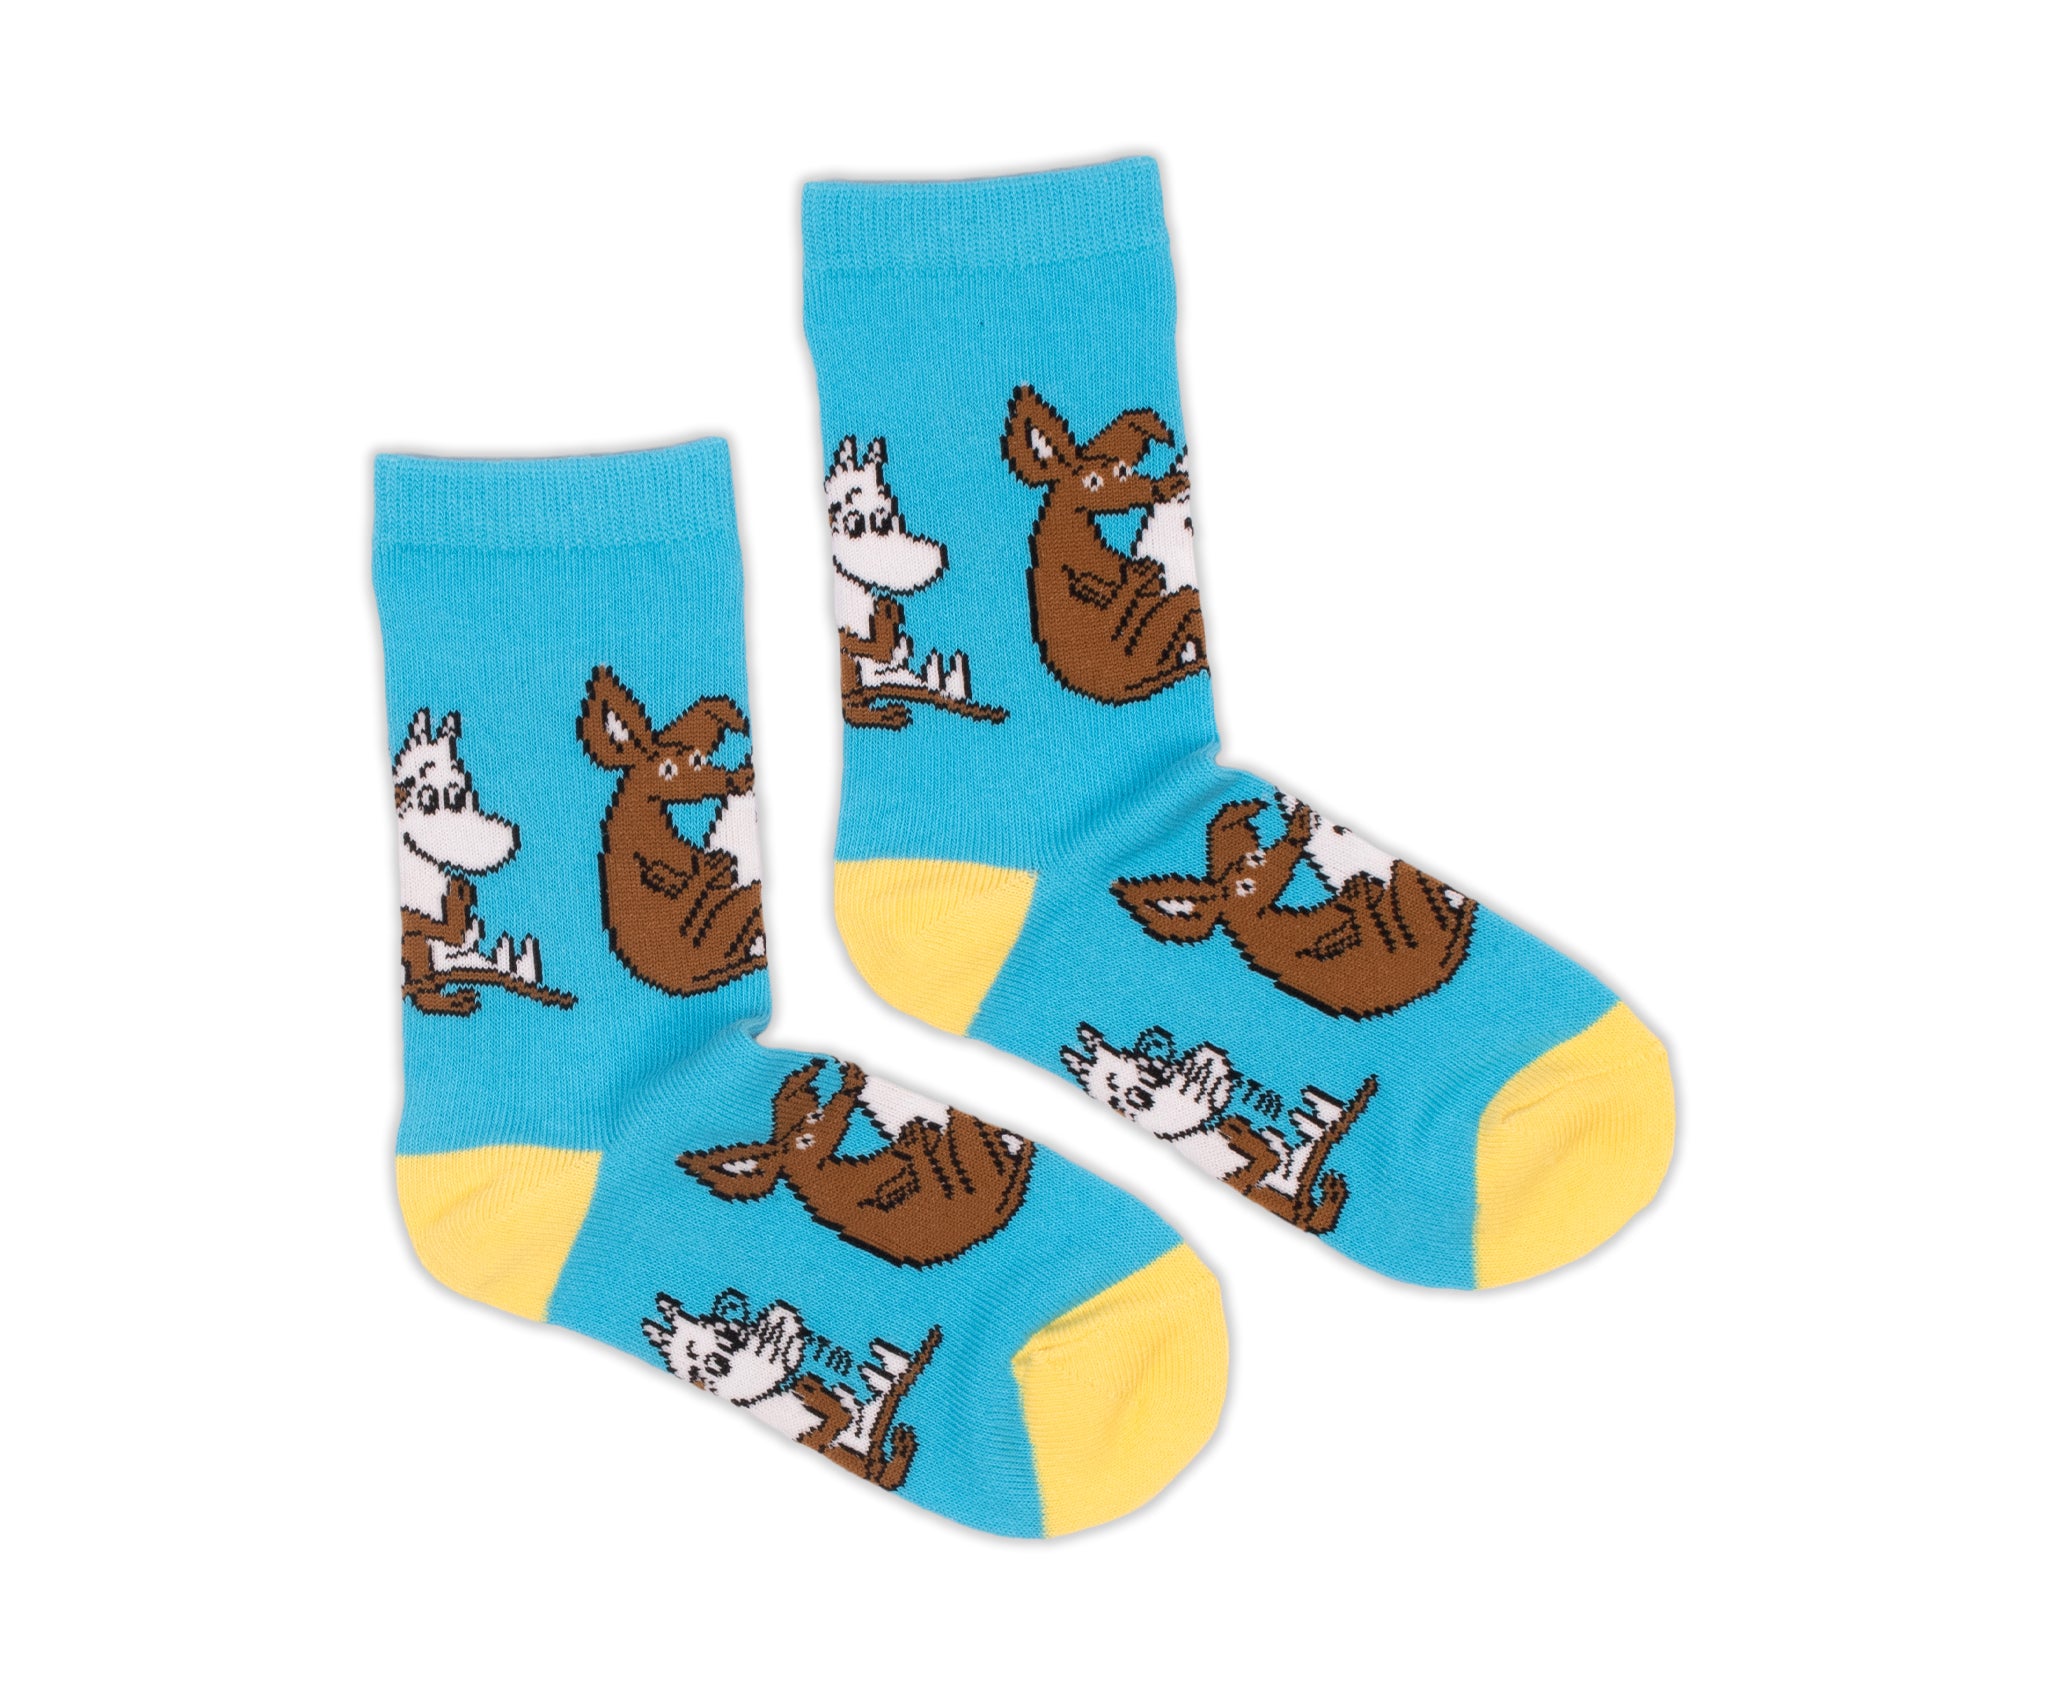 Moomintroll and Sniff Kids Socks - Turquoise